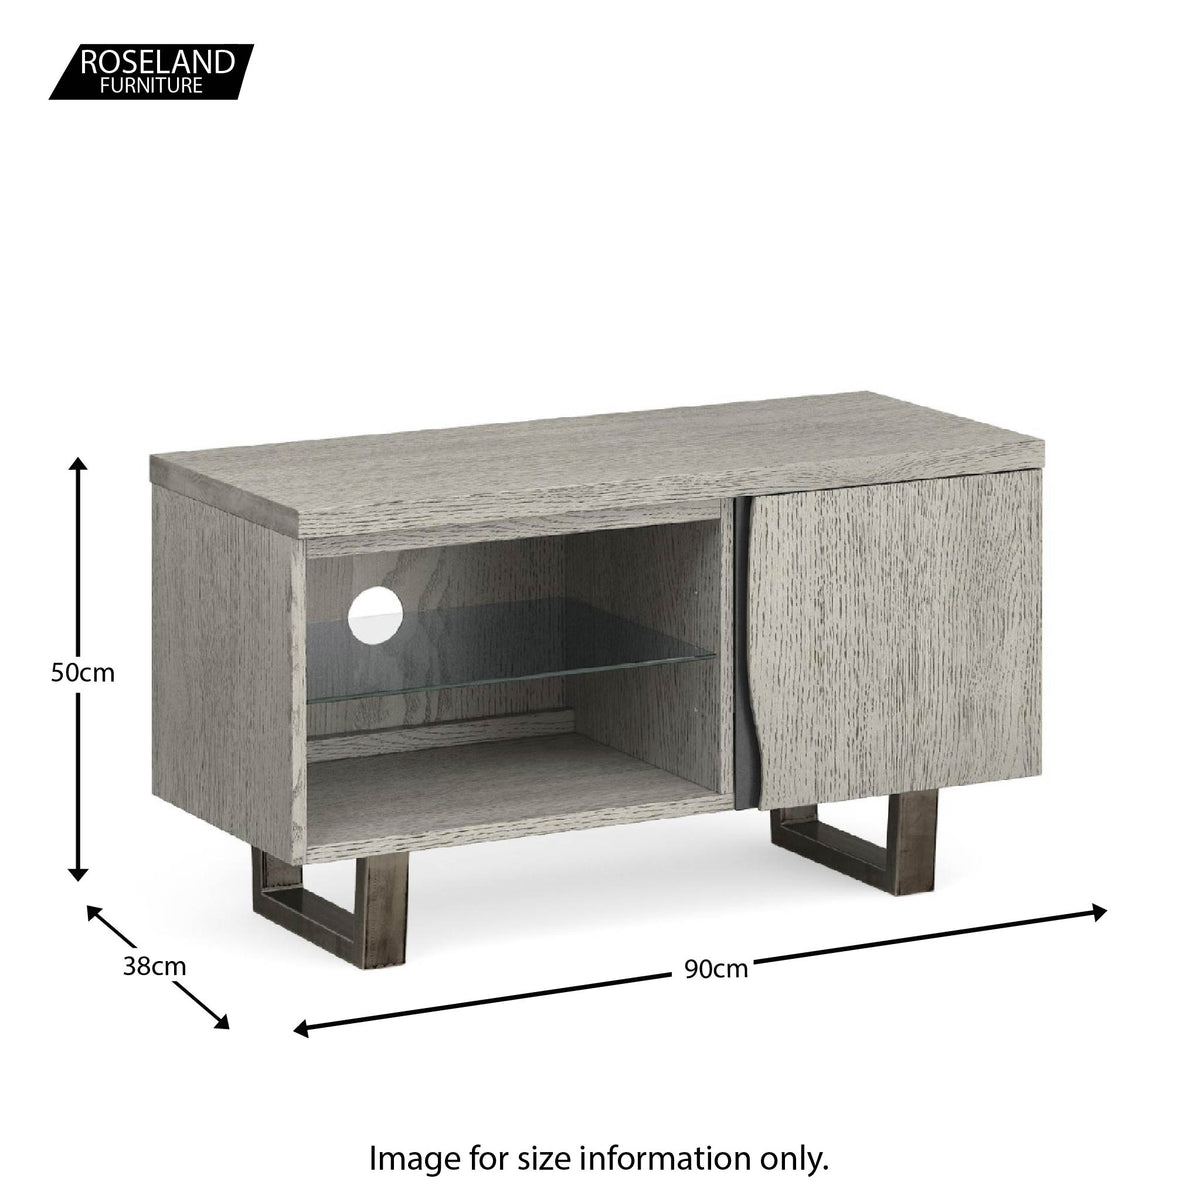 Soho Small 90 cm TV Stand with Glass Shelf - size guide